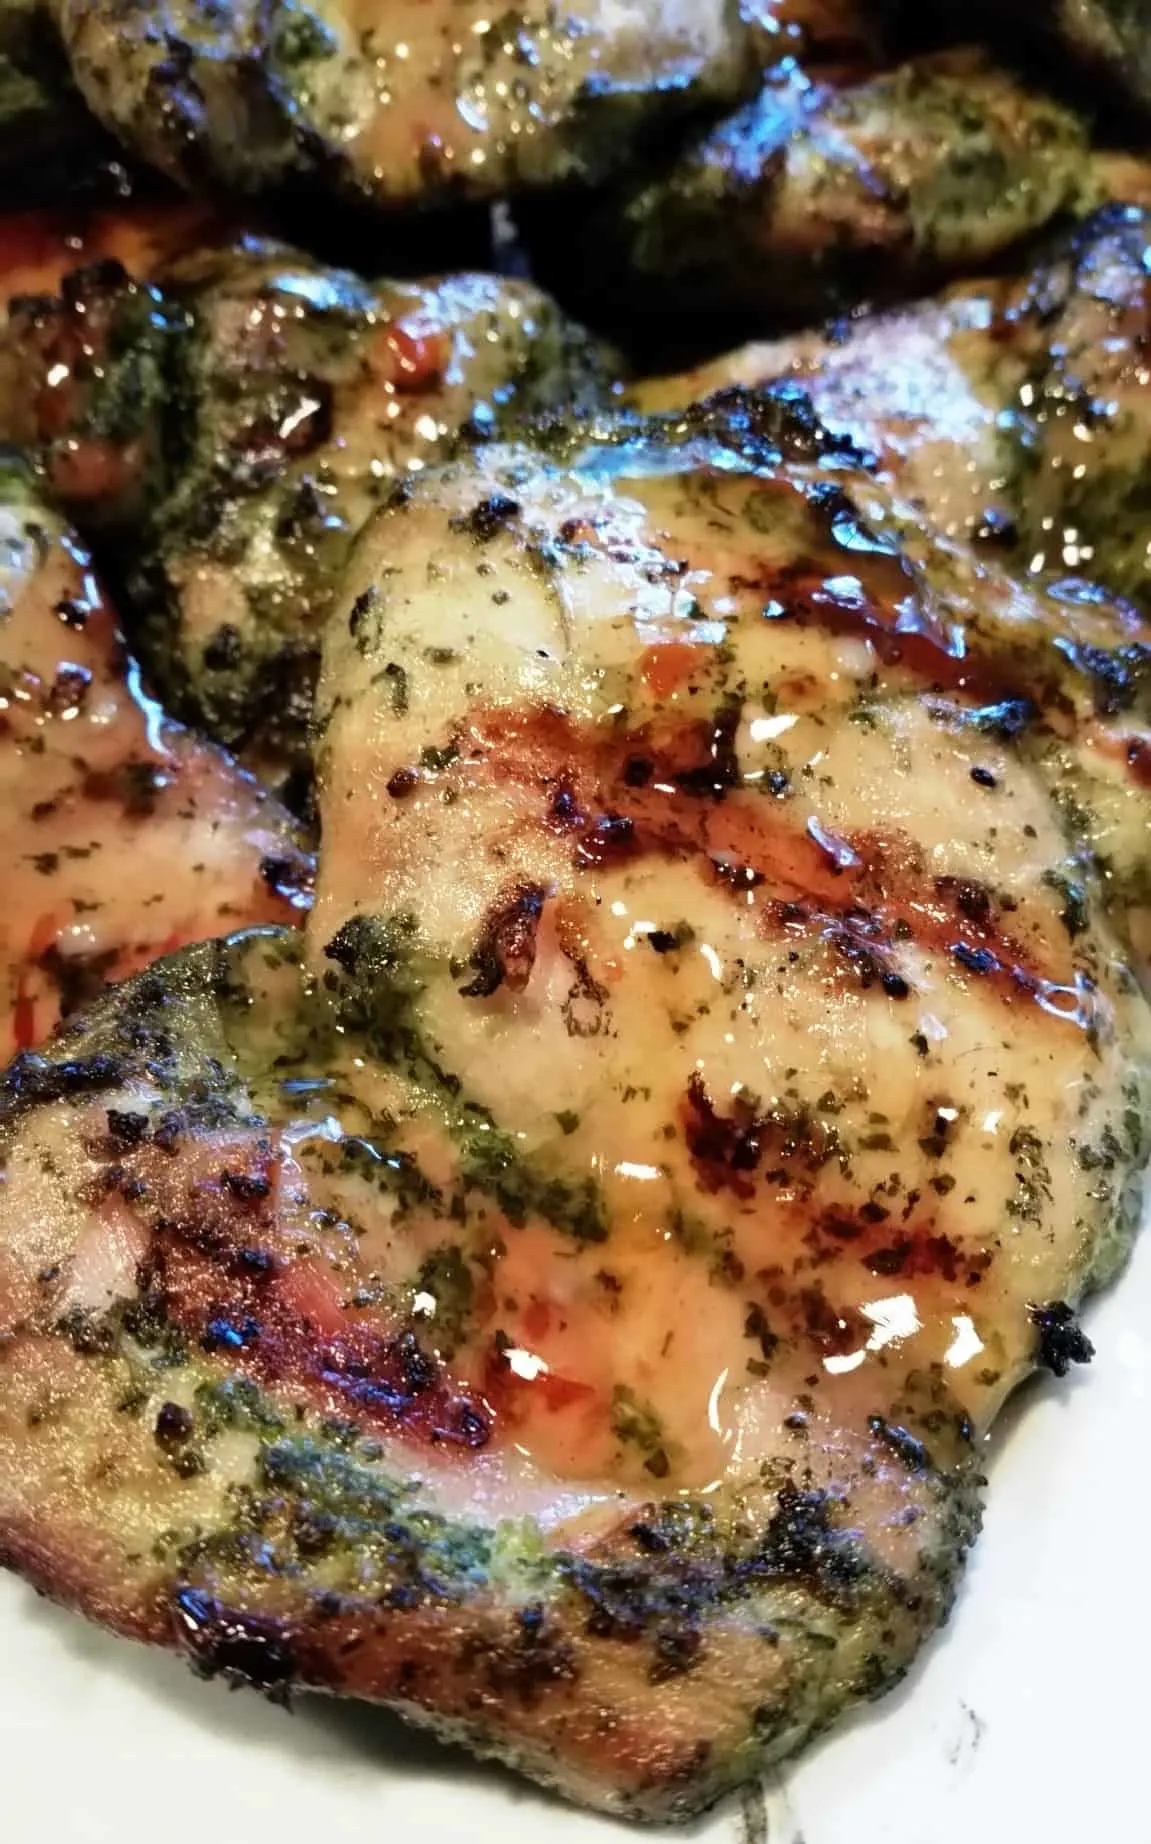 Marinated tender, juicy, grilled cilantro chicken with a sweet sauce glaze. This will be your favorite grilled chicken this summer! The flavors are fabulous! via @Mooreorlesscook